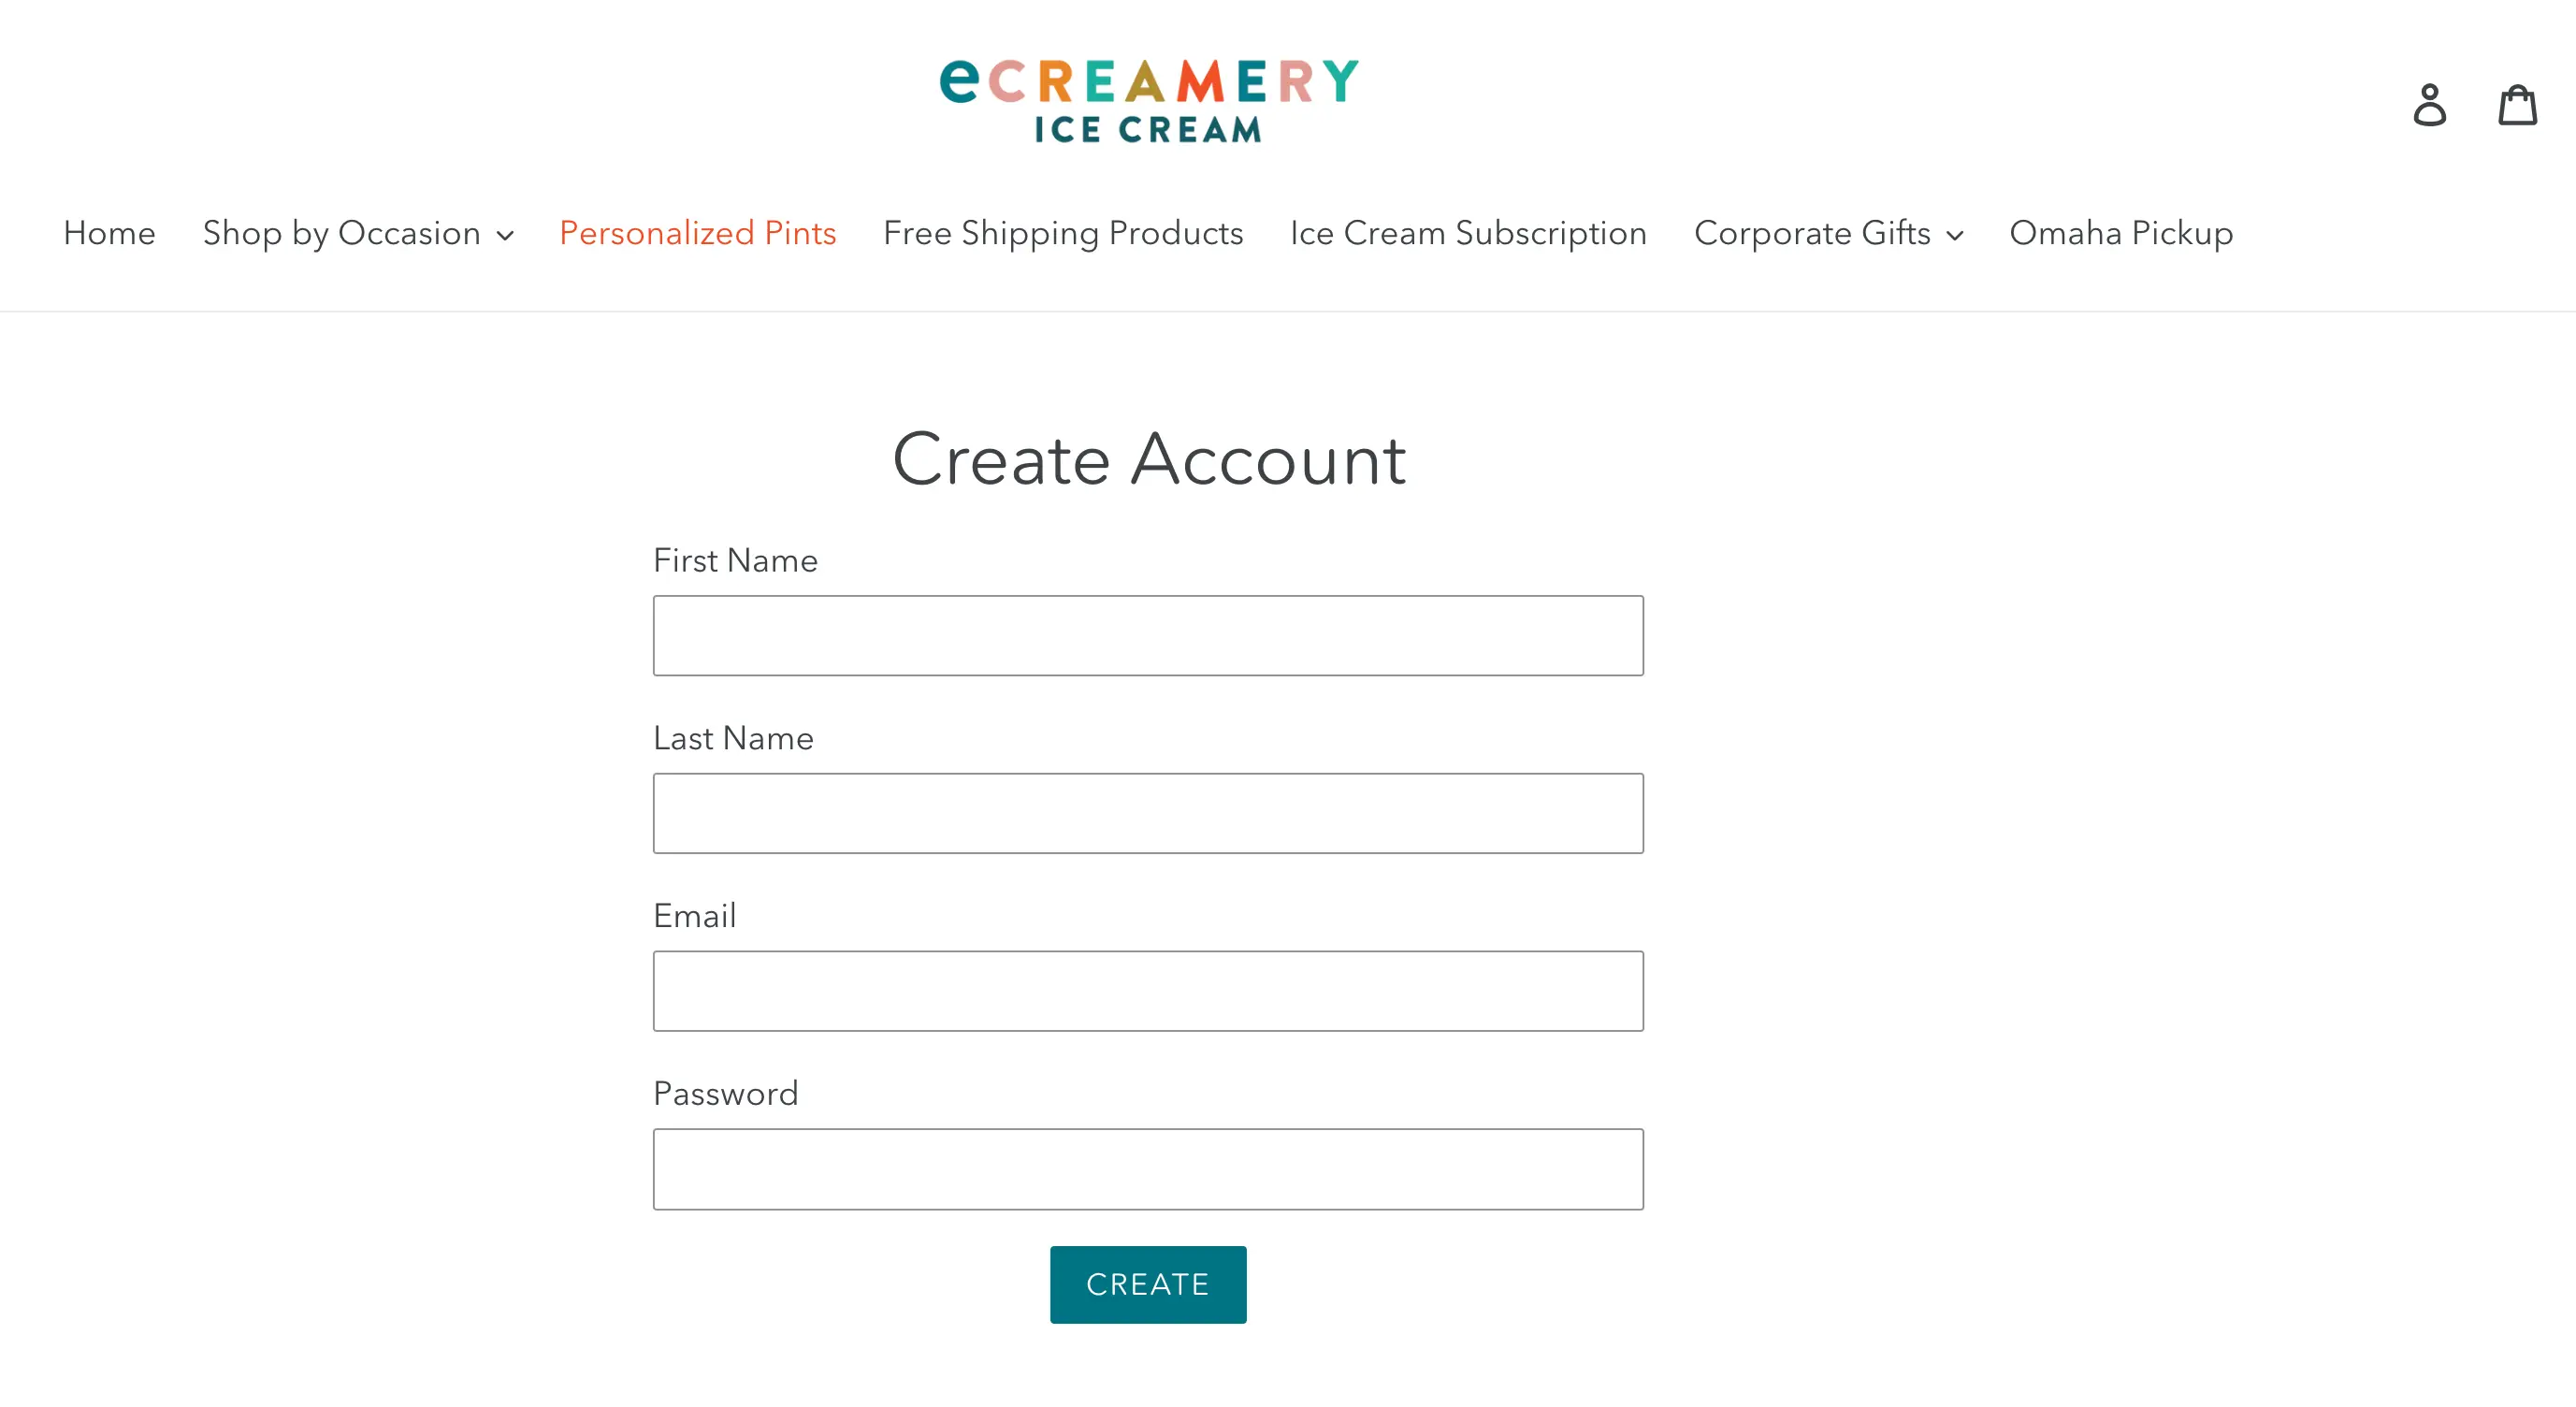 Image shows a screen on ecreamery’s website where users can create an account, entering their first and last names, email, and password.